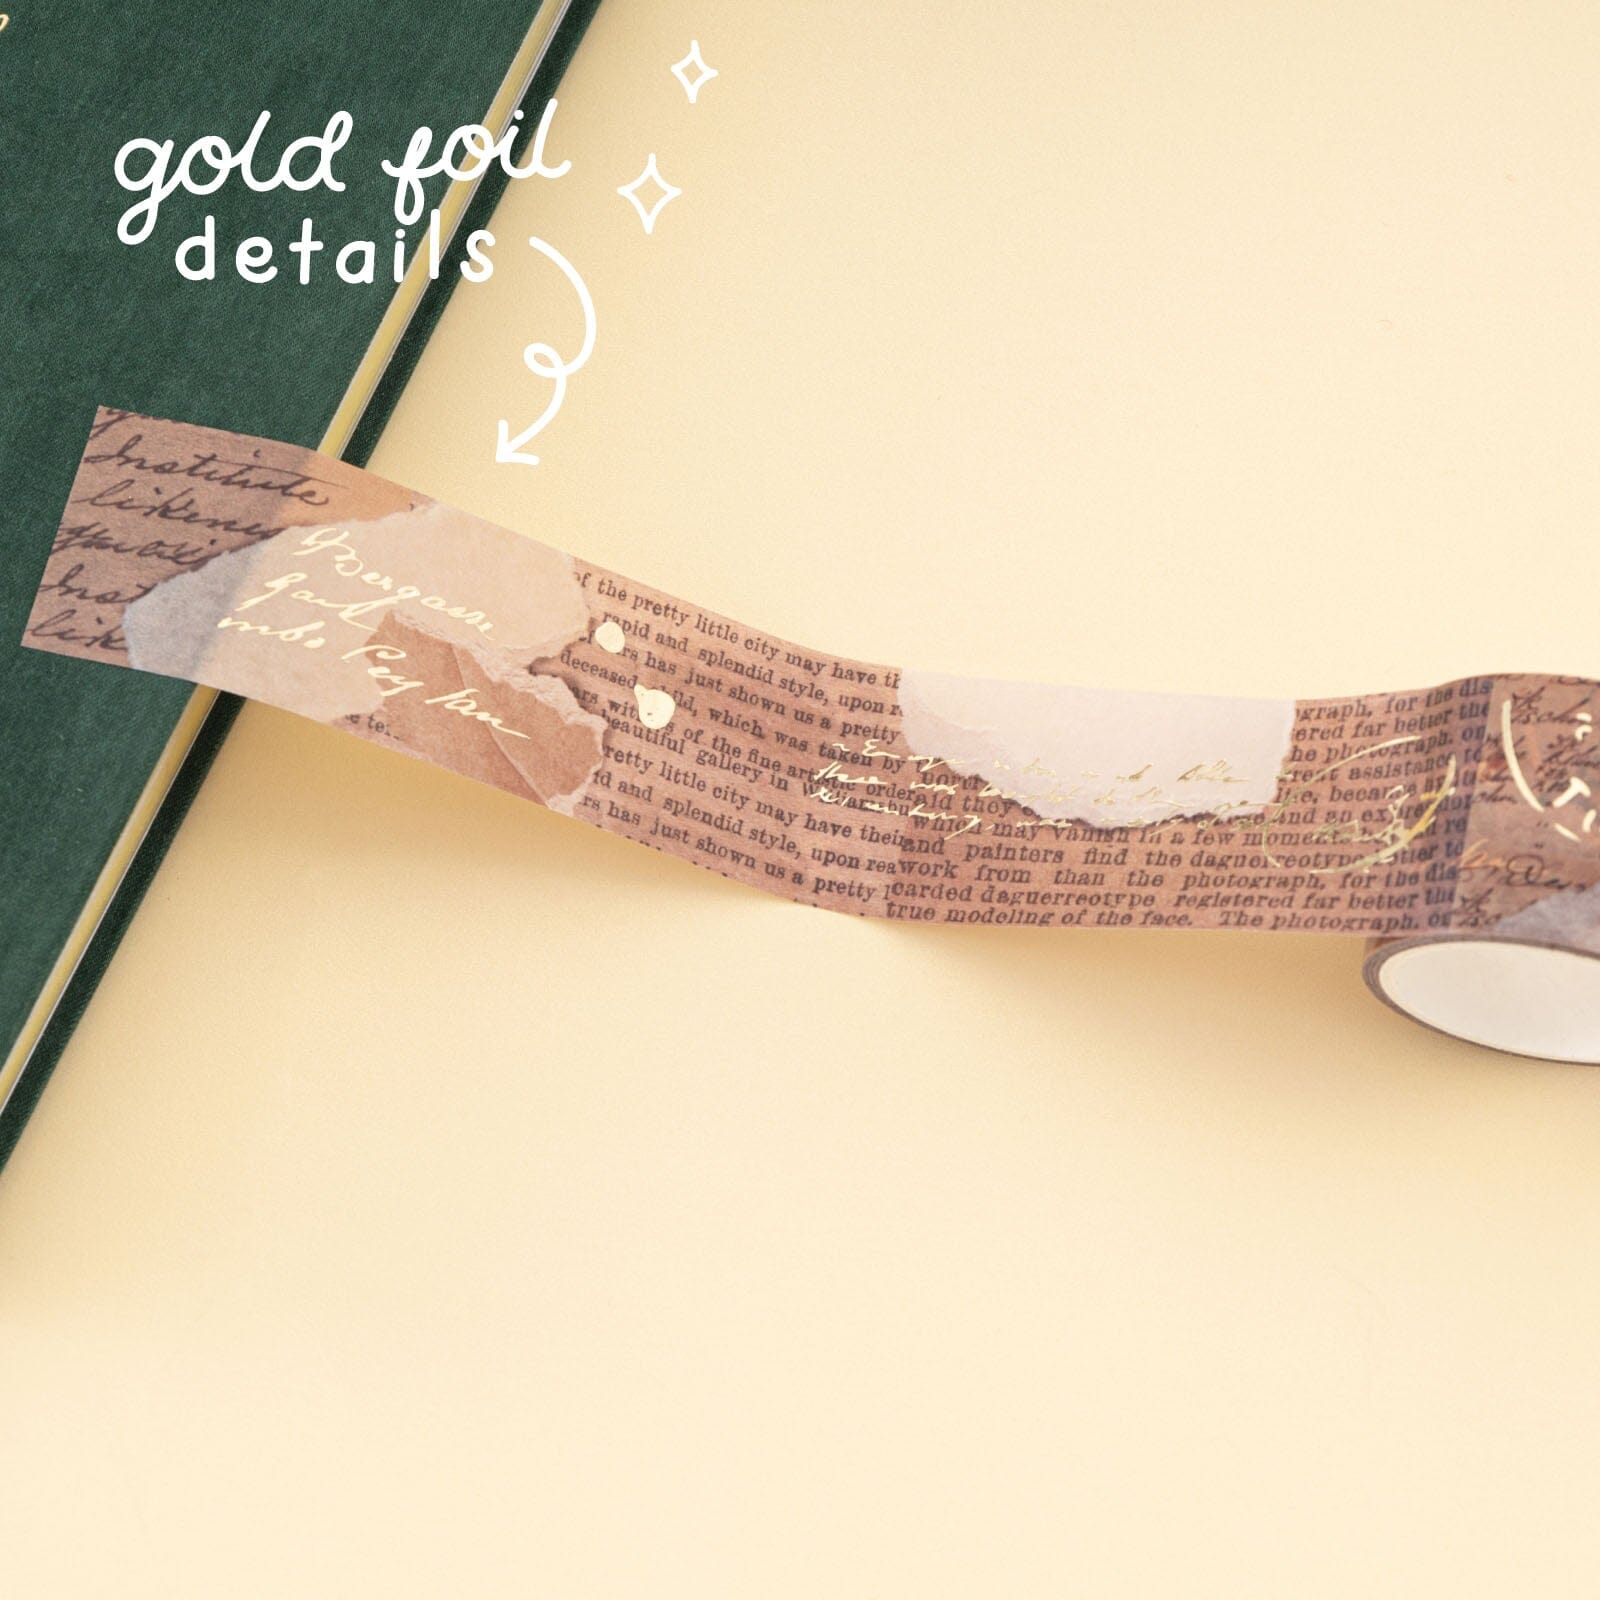 Gold fol details on the collage style washi tape roll with book pages and ripped paper